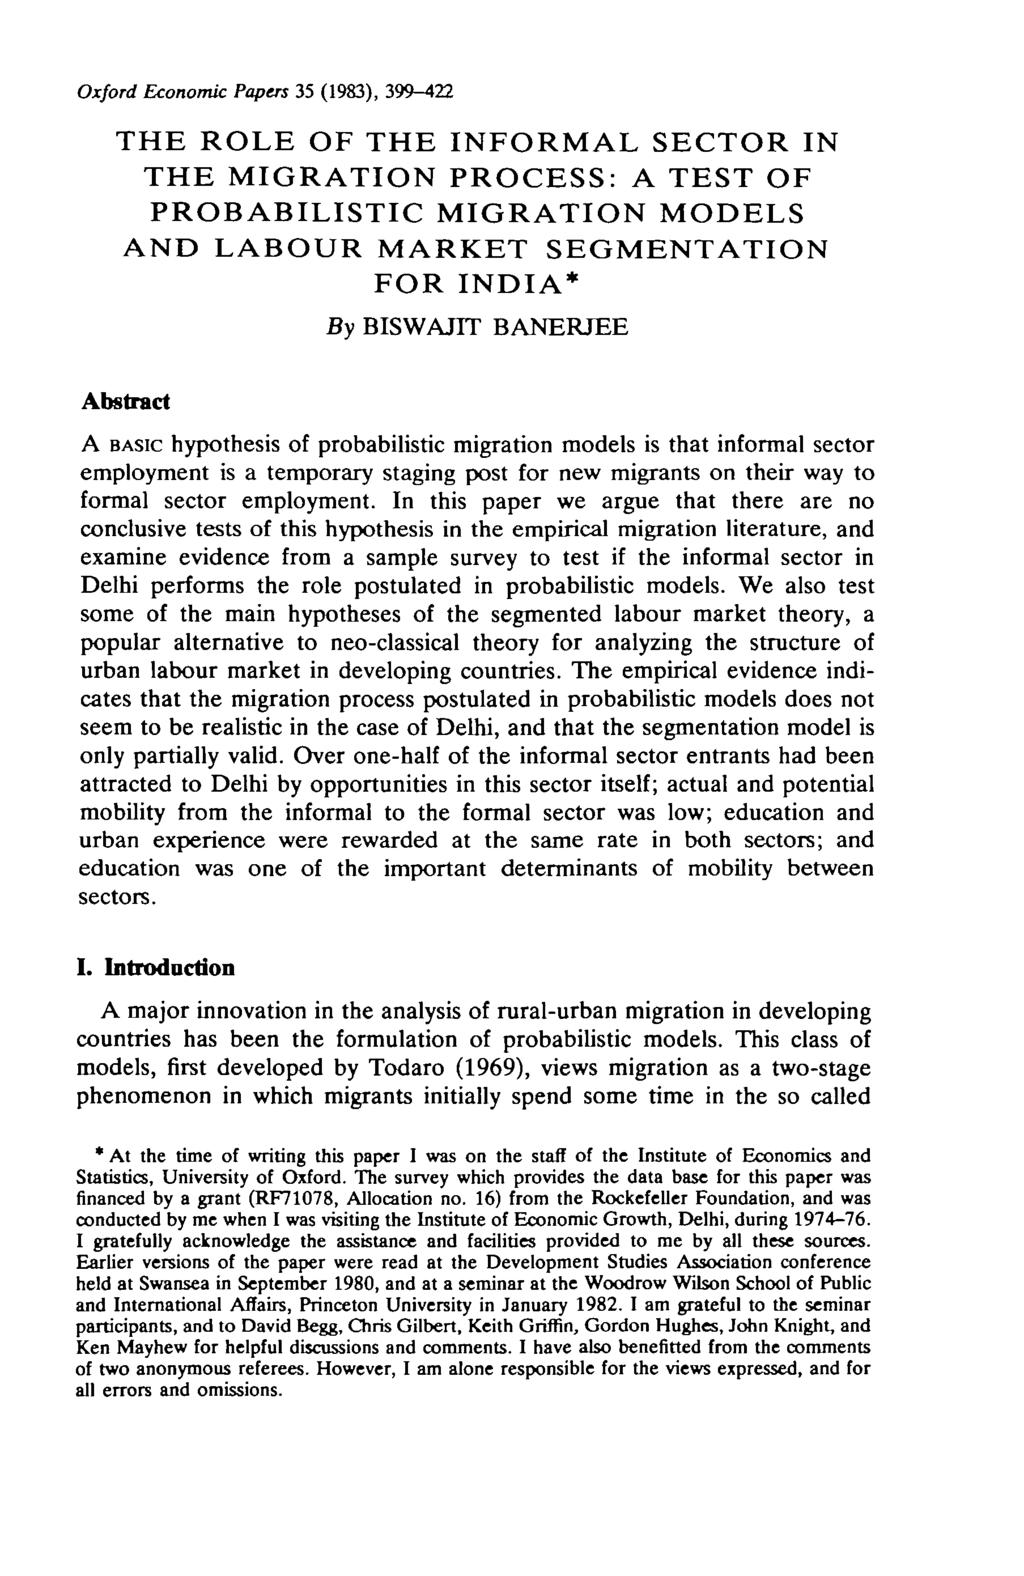 Oxford Economic Papers 35 (1983), 399-422 THE ROLE OF THE INFORMAL SECTOR IN THE MIGRATION PROCESS: A TEST OF PROBABILISTIC MIGRATION MODELS AND LABOUR MARKET SEGMENTATION FOR INDIA* By BISWAJTT